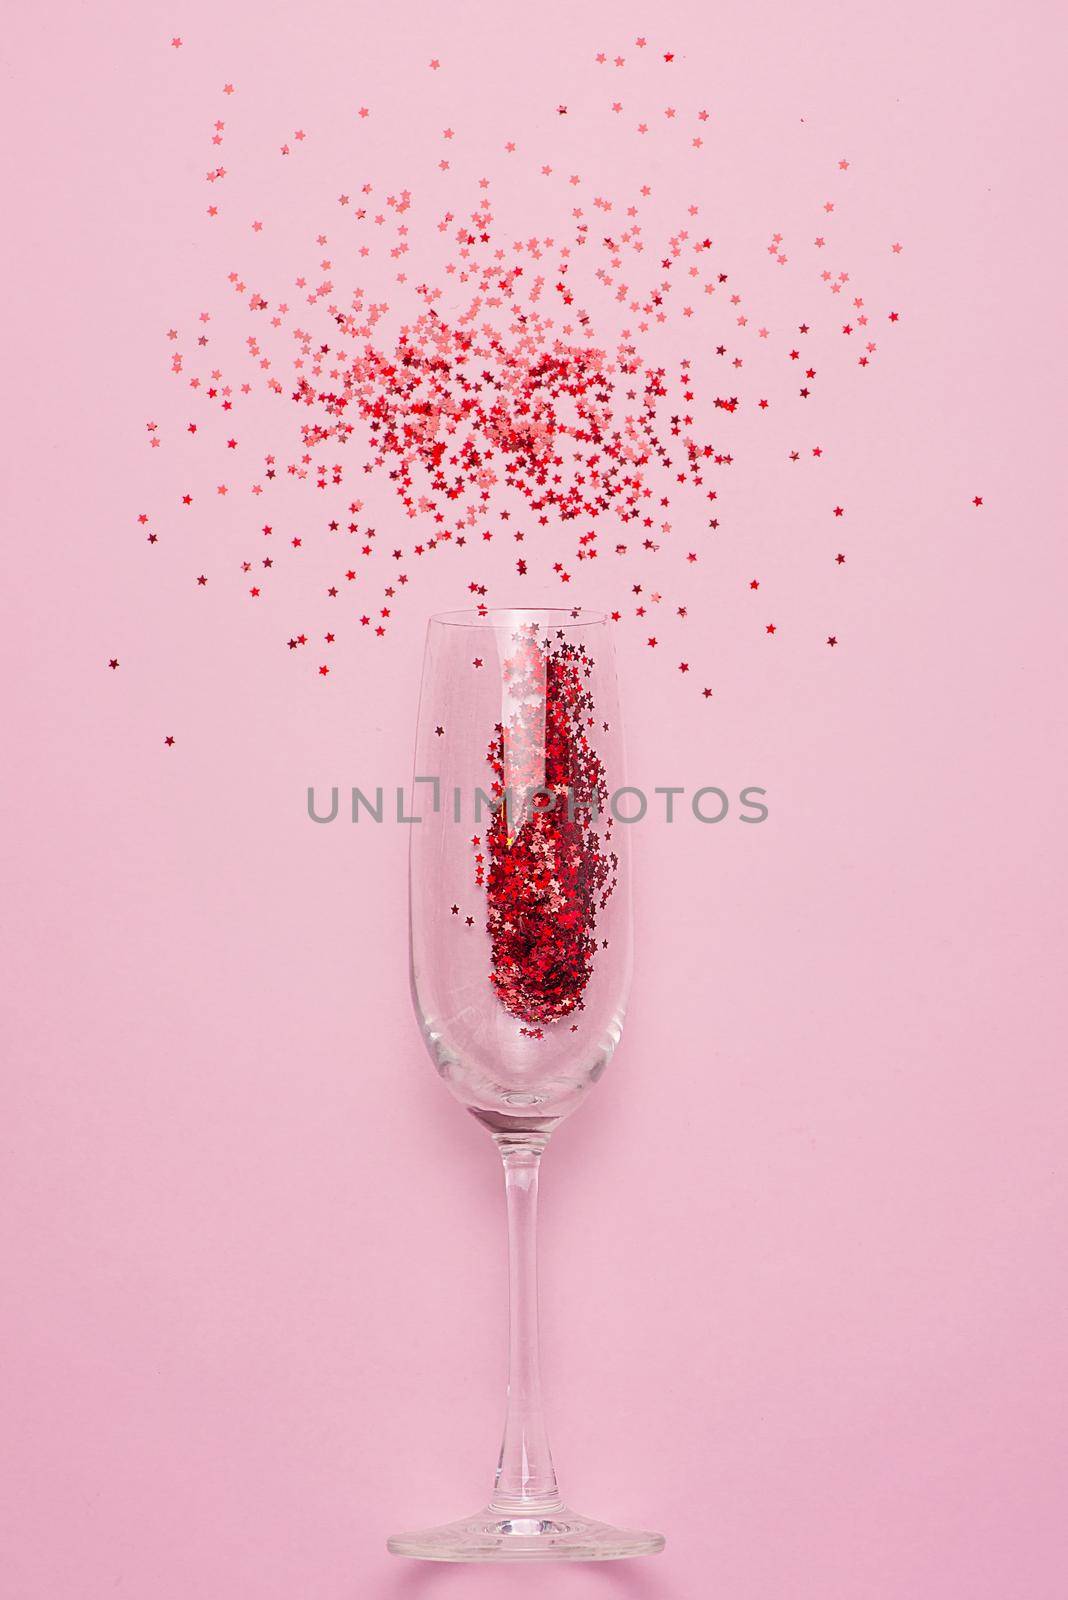 Flat lay of Celebration. Champagne glass with colorful party streamers on pink background. by makidotvn